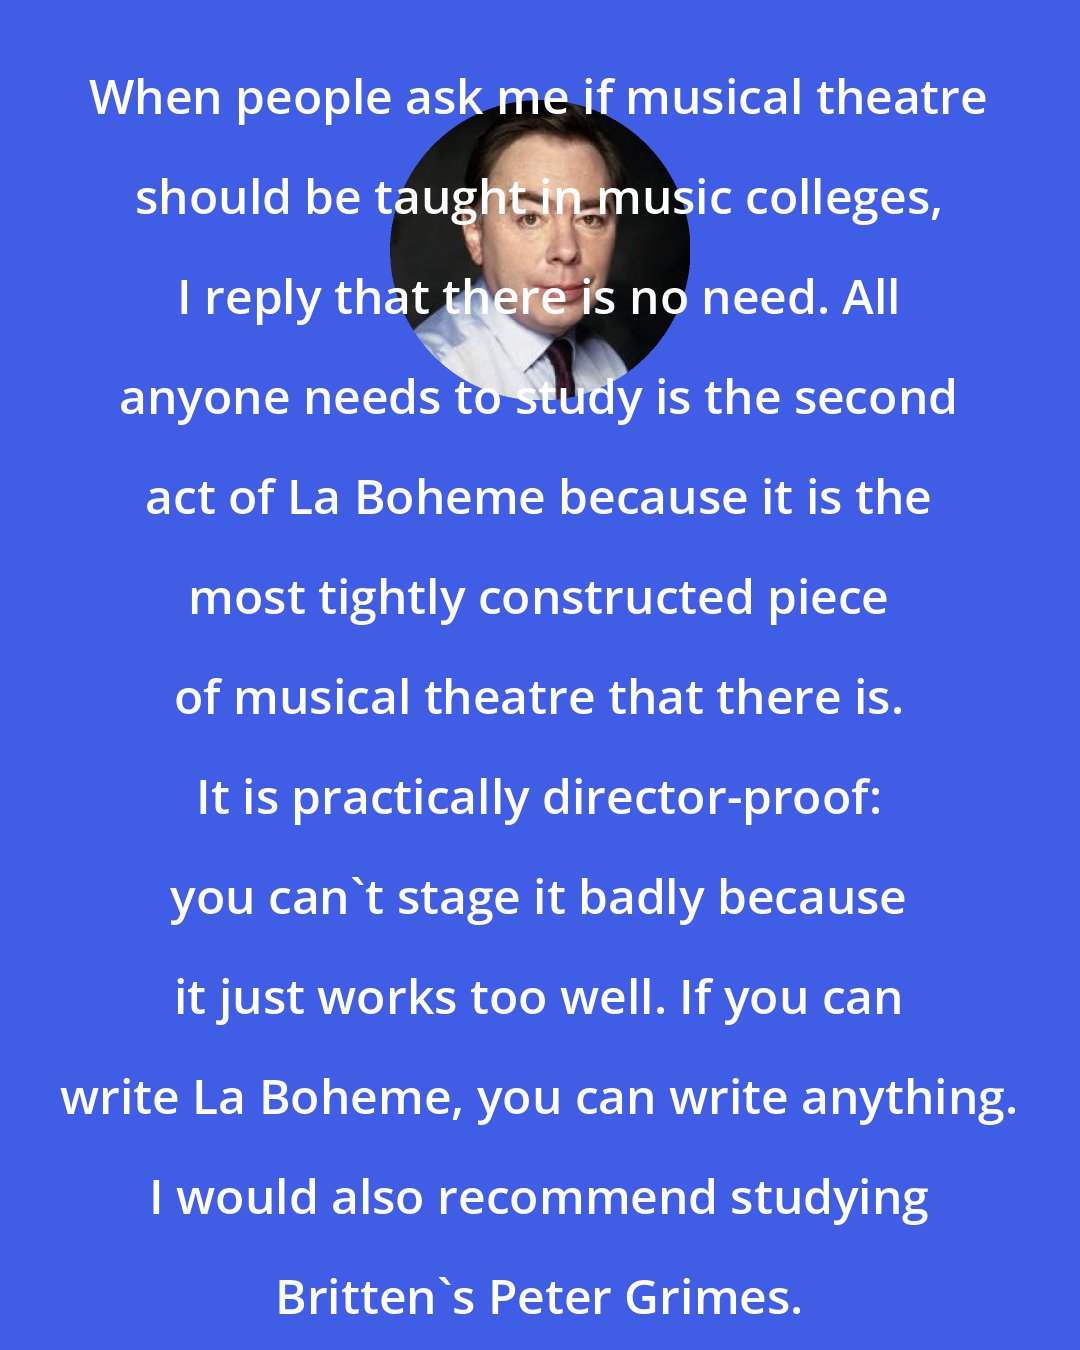 Andrew Lloyd Webber: When people ask me if musical theatre should be taught in music colleges, I reply that there is no need. All anyone needs to study is the second act of La Boheme because it is the most tightly constructed piece of musical theatre that there is. It is practically director-proof: you can't stage it badly because it just works too well. If you can write La Boheme, you can write anything. I would also recommend studying Britten's Peter Grimes.